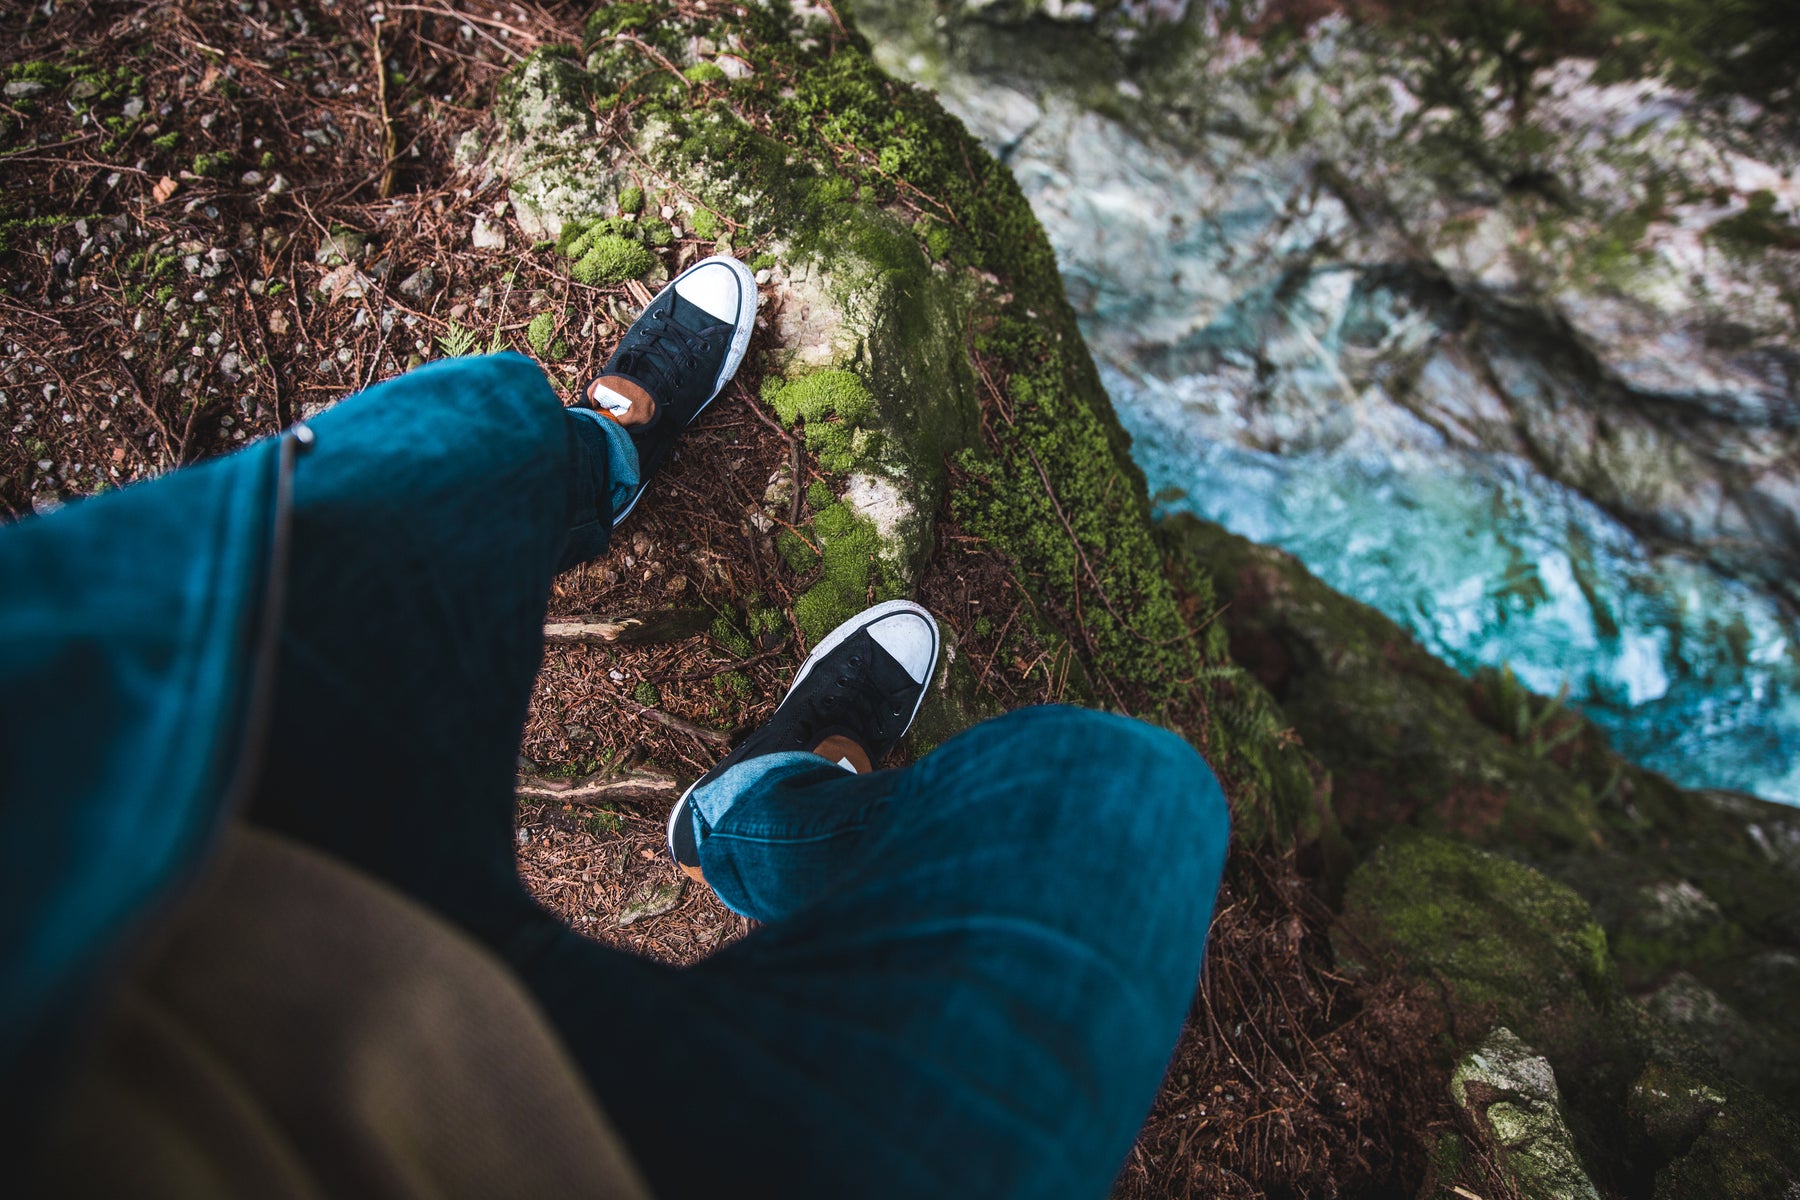 outdoor photo of a person's feet overlooking a steep ravine with water below.